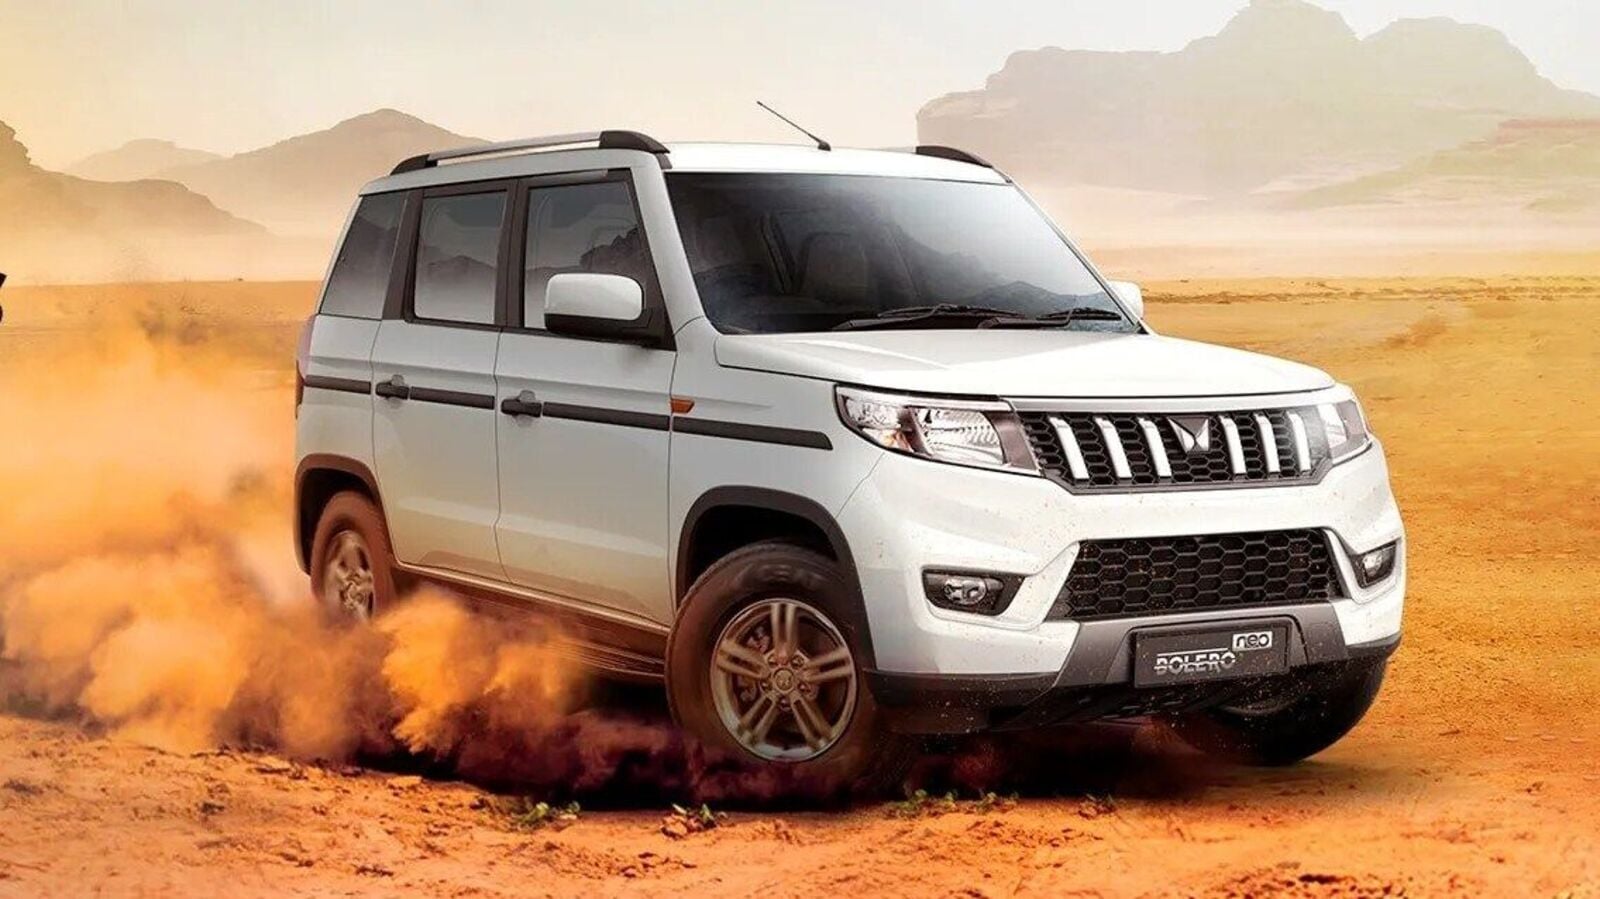 Mahindra Bolero Neo Limited Edition launched in India, priced at ₹11.50  lakh | Car News